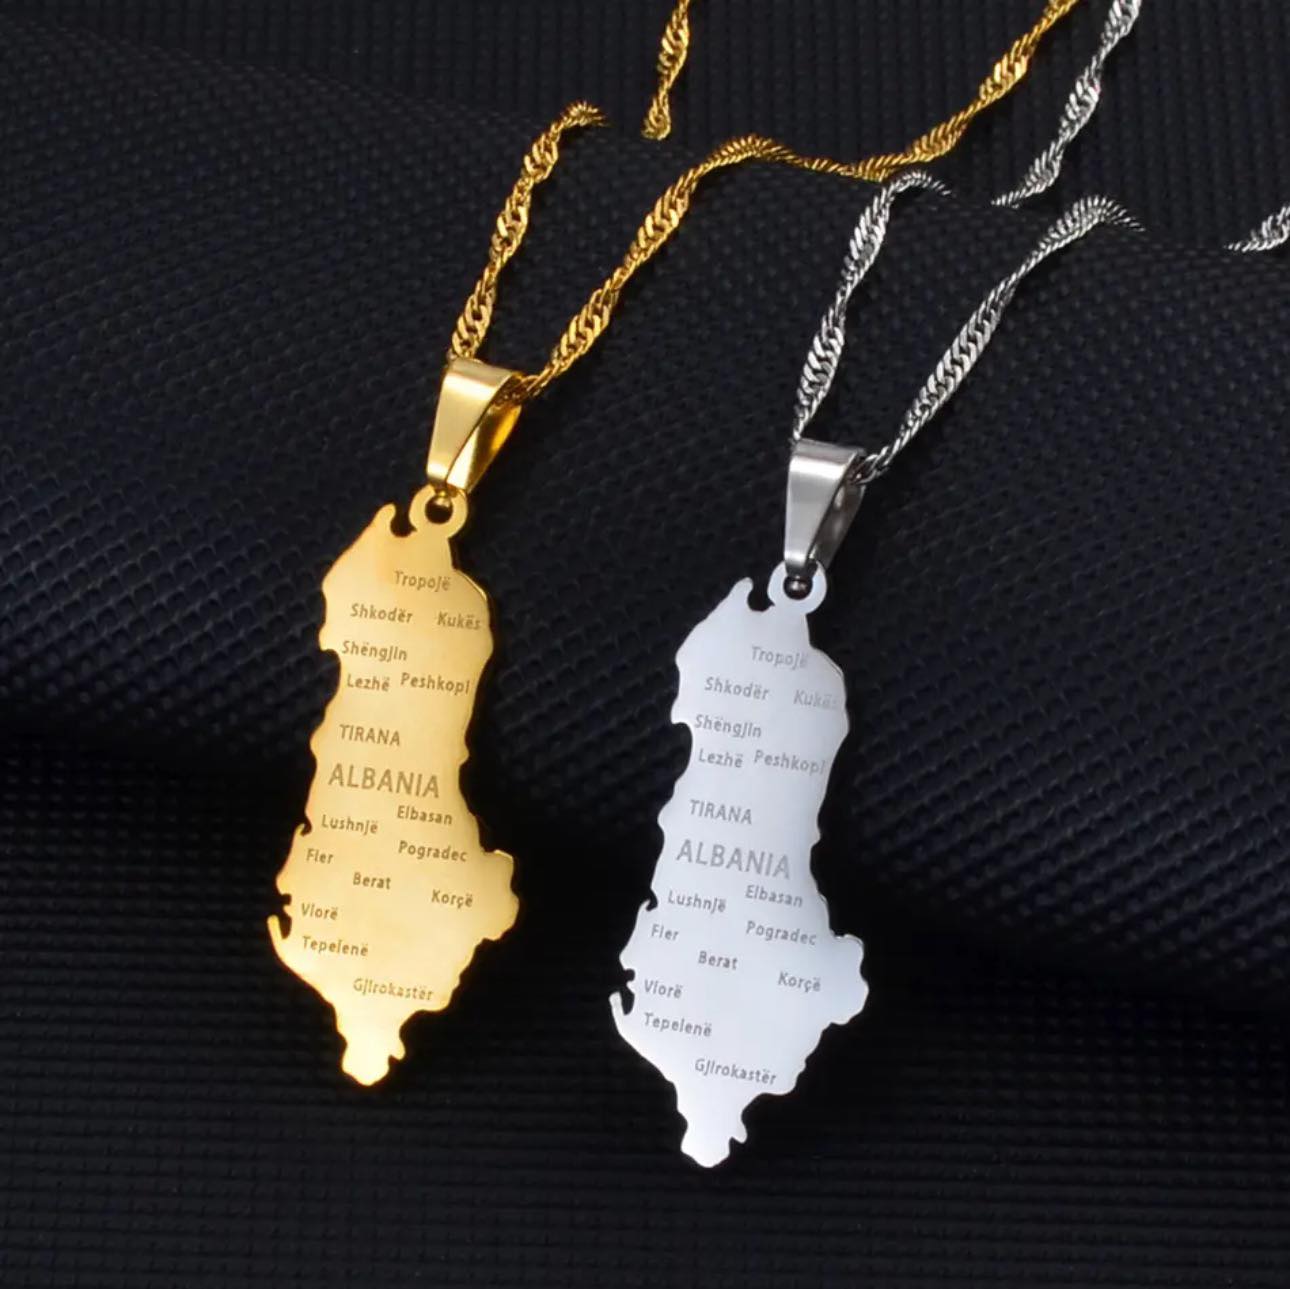 Albania Map & Cities Necklace